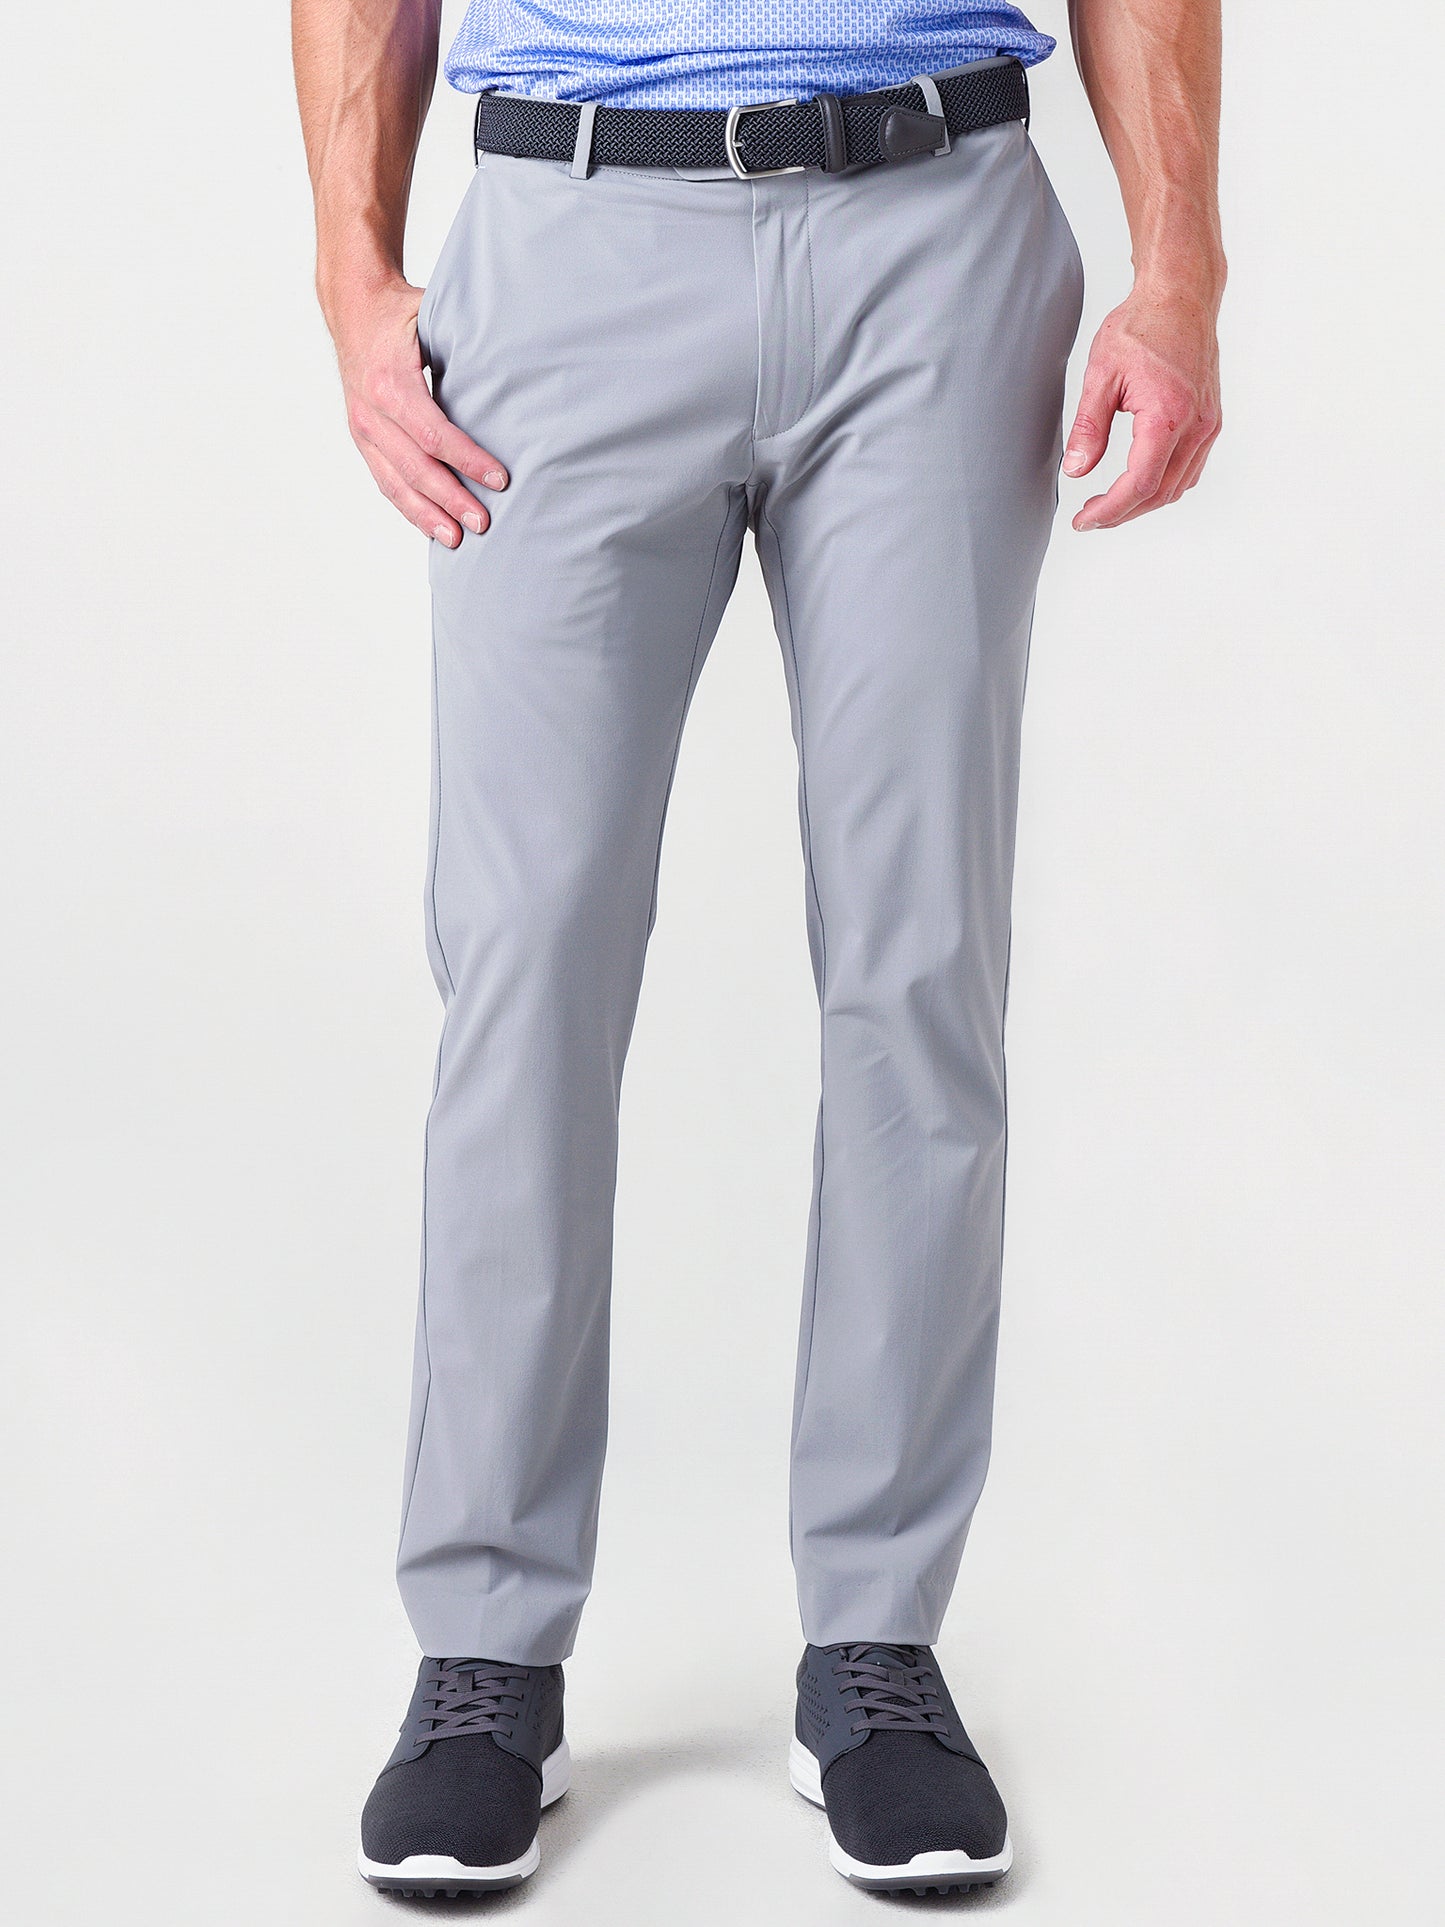 Discover The Iconic Performance Pant - Peter Millar